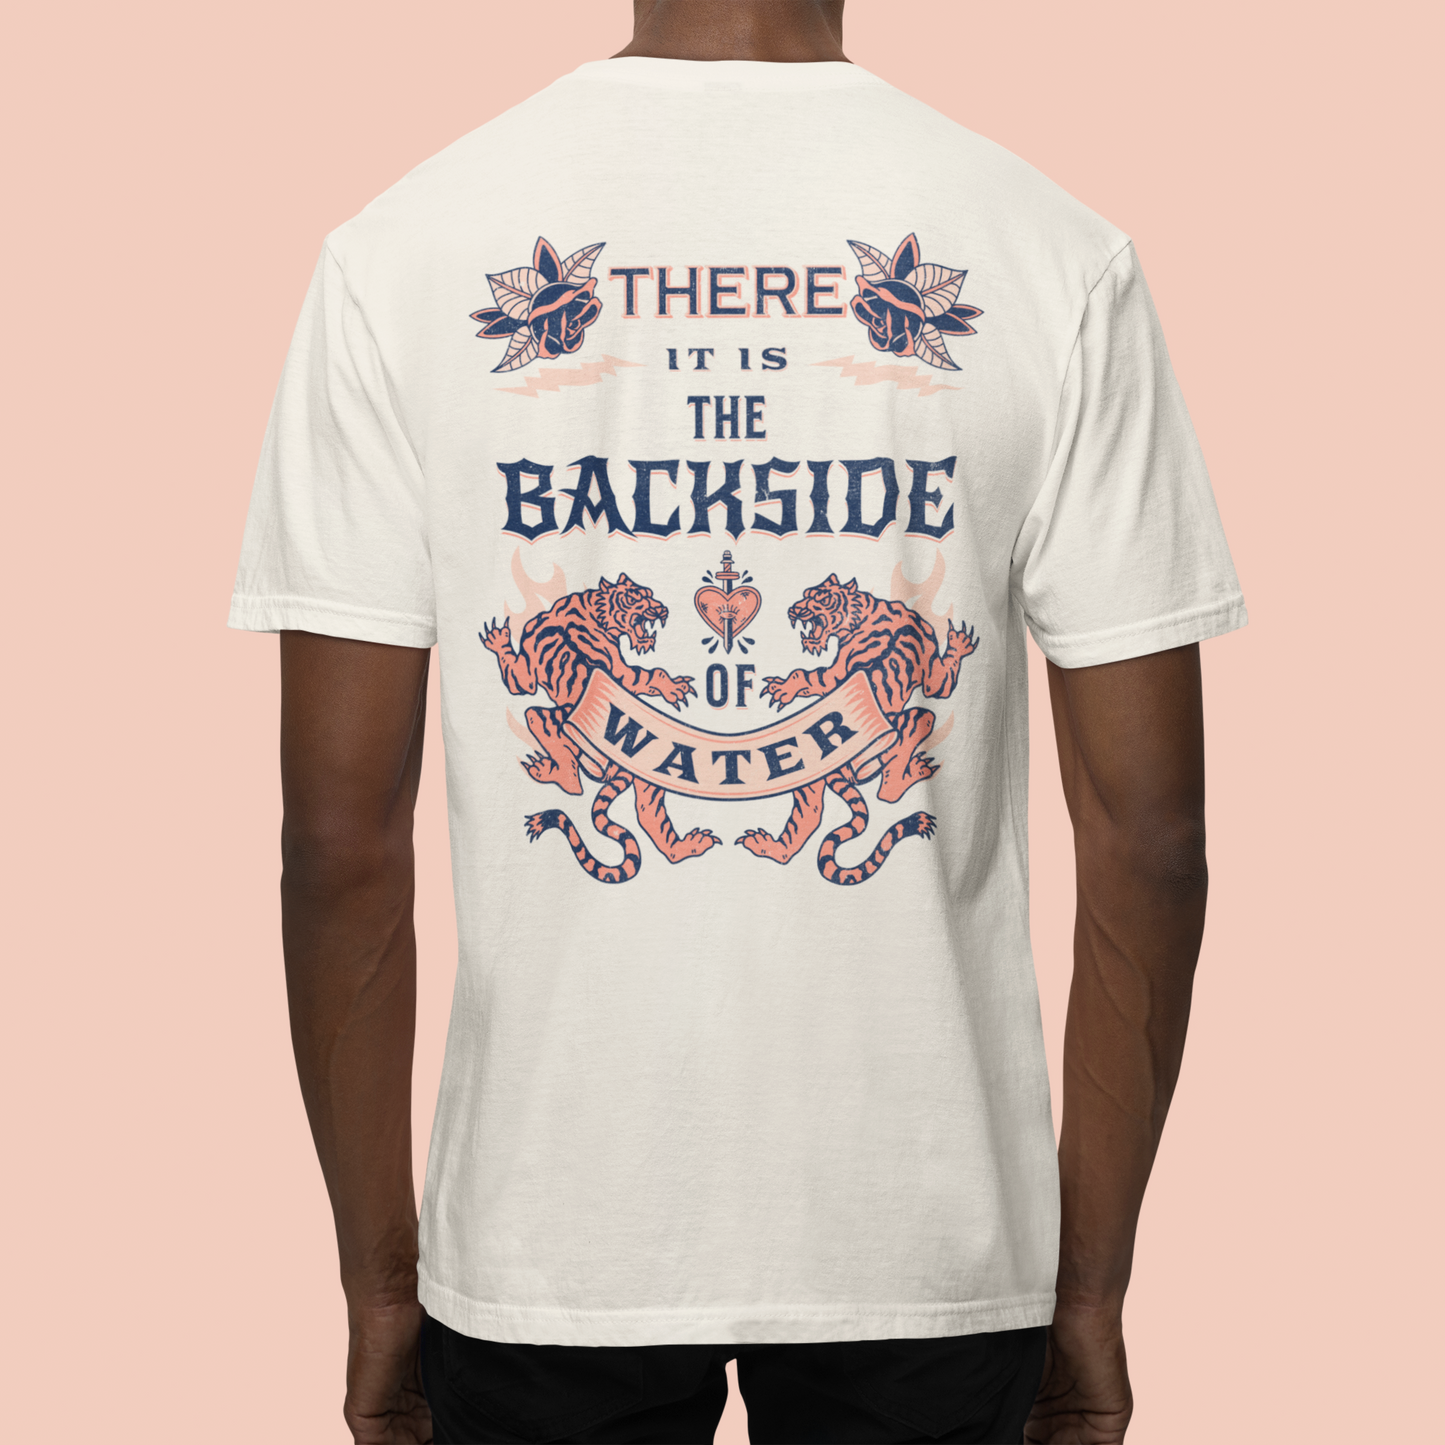 The Backside of Water Shirt